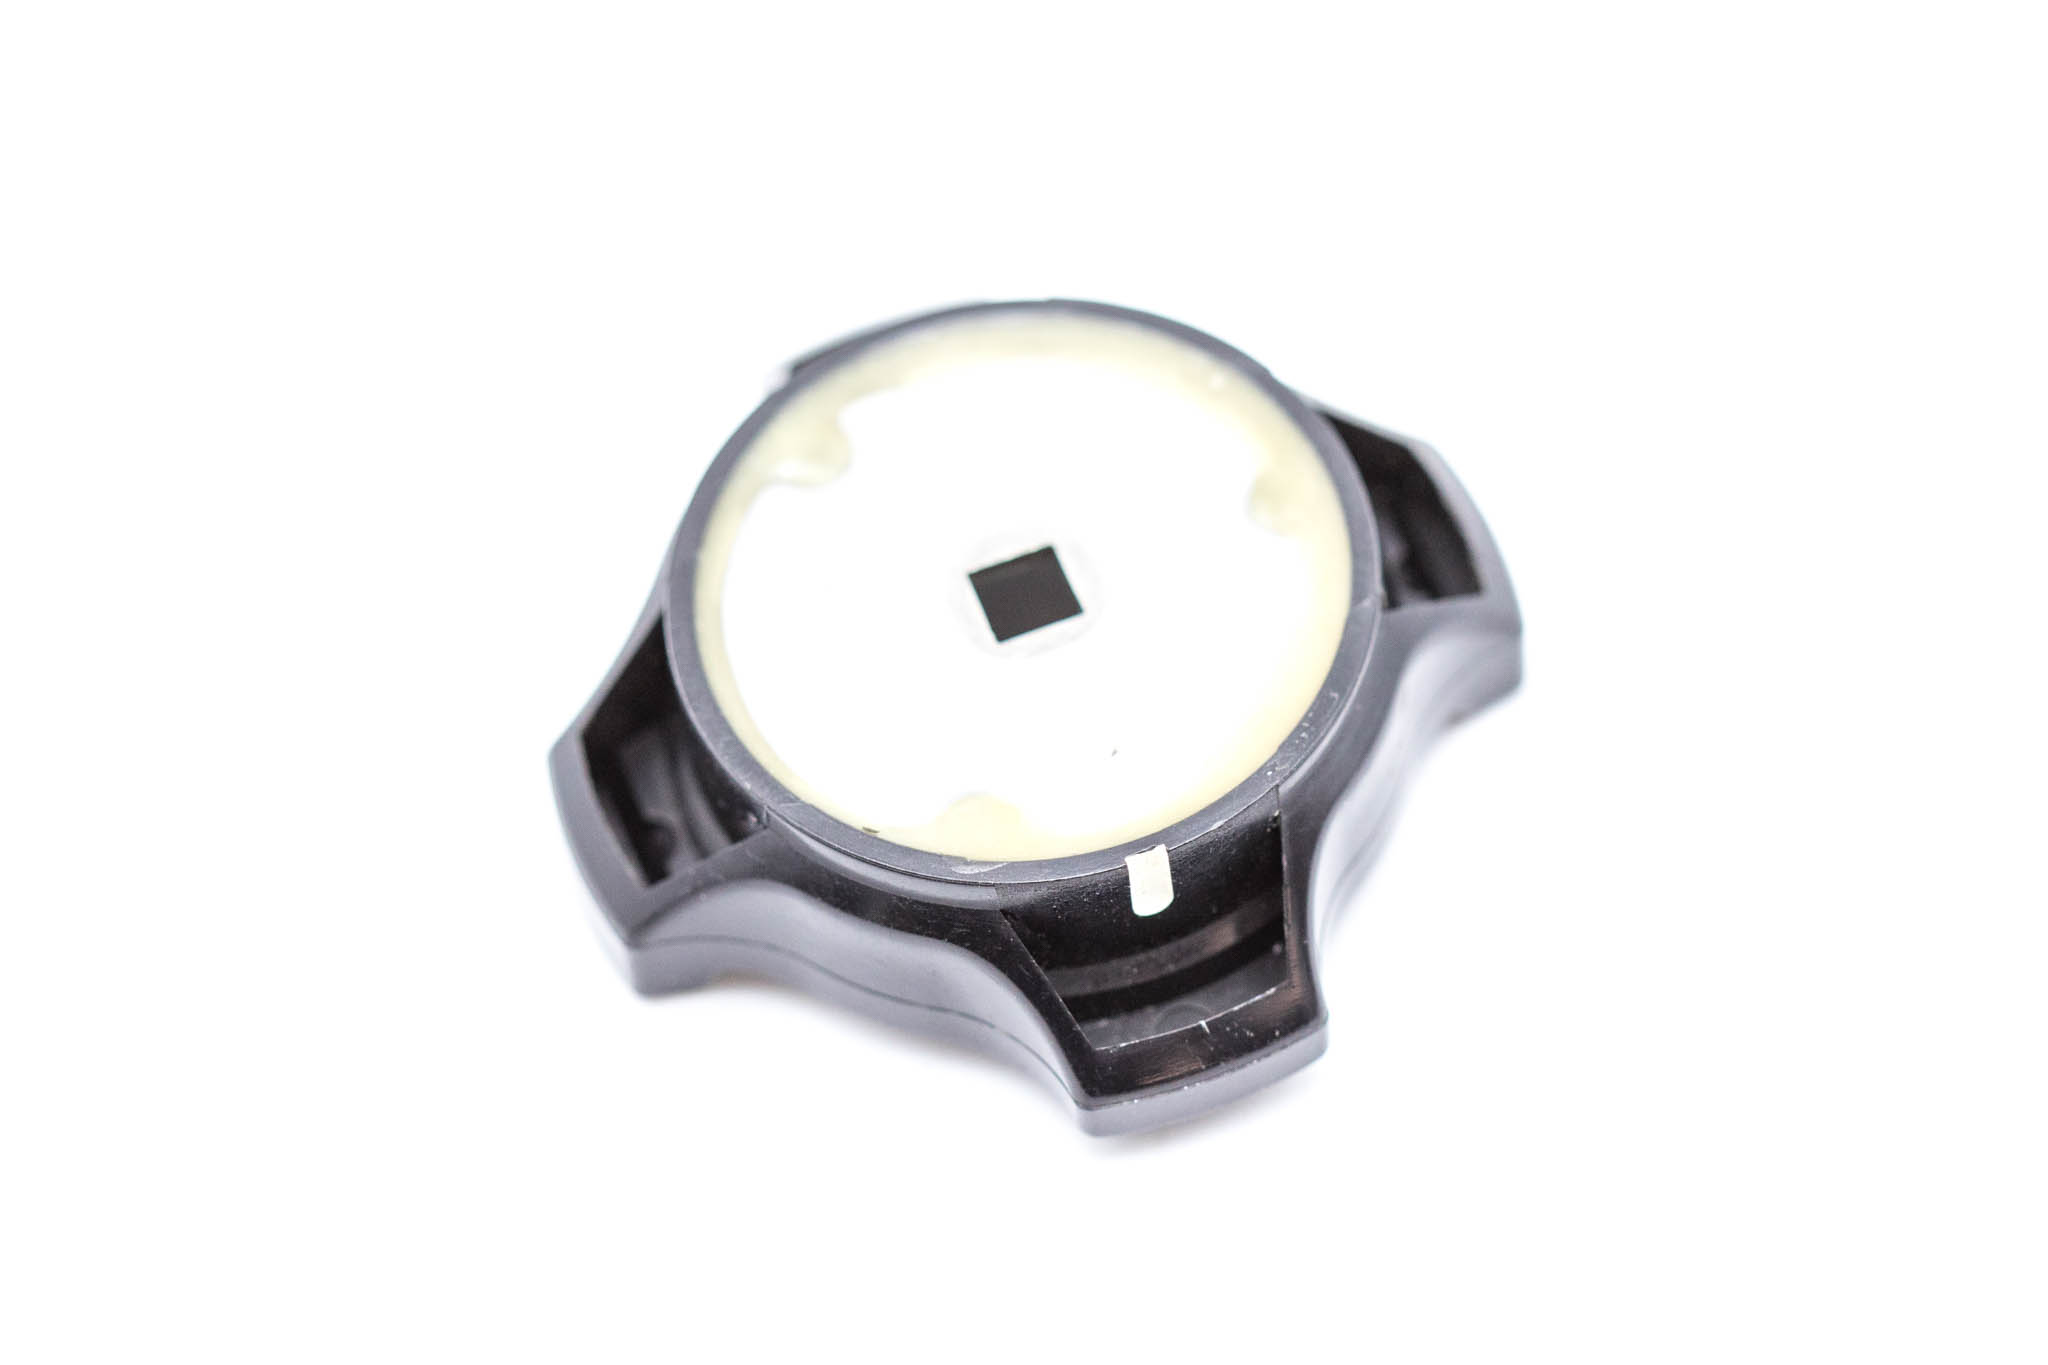 OEM Control Knob (Left/Right) Face Cover - OSF, OSF-2, OSF-35